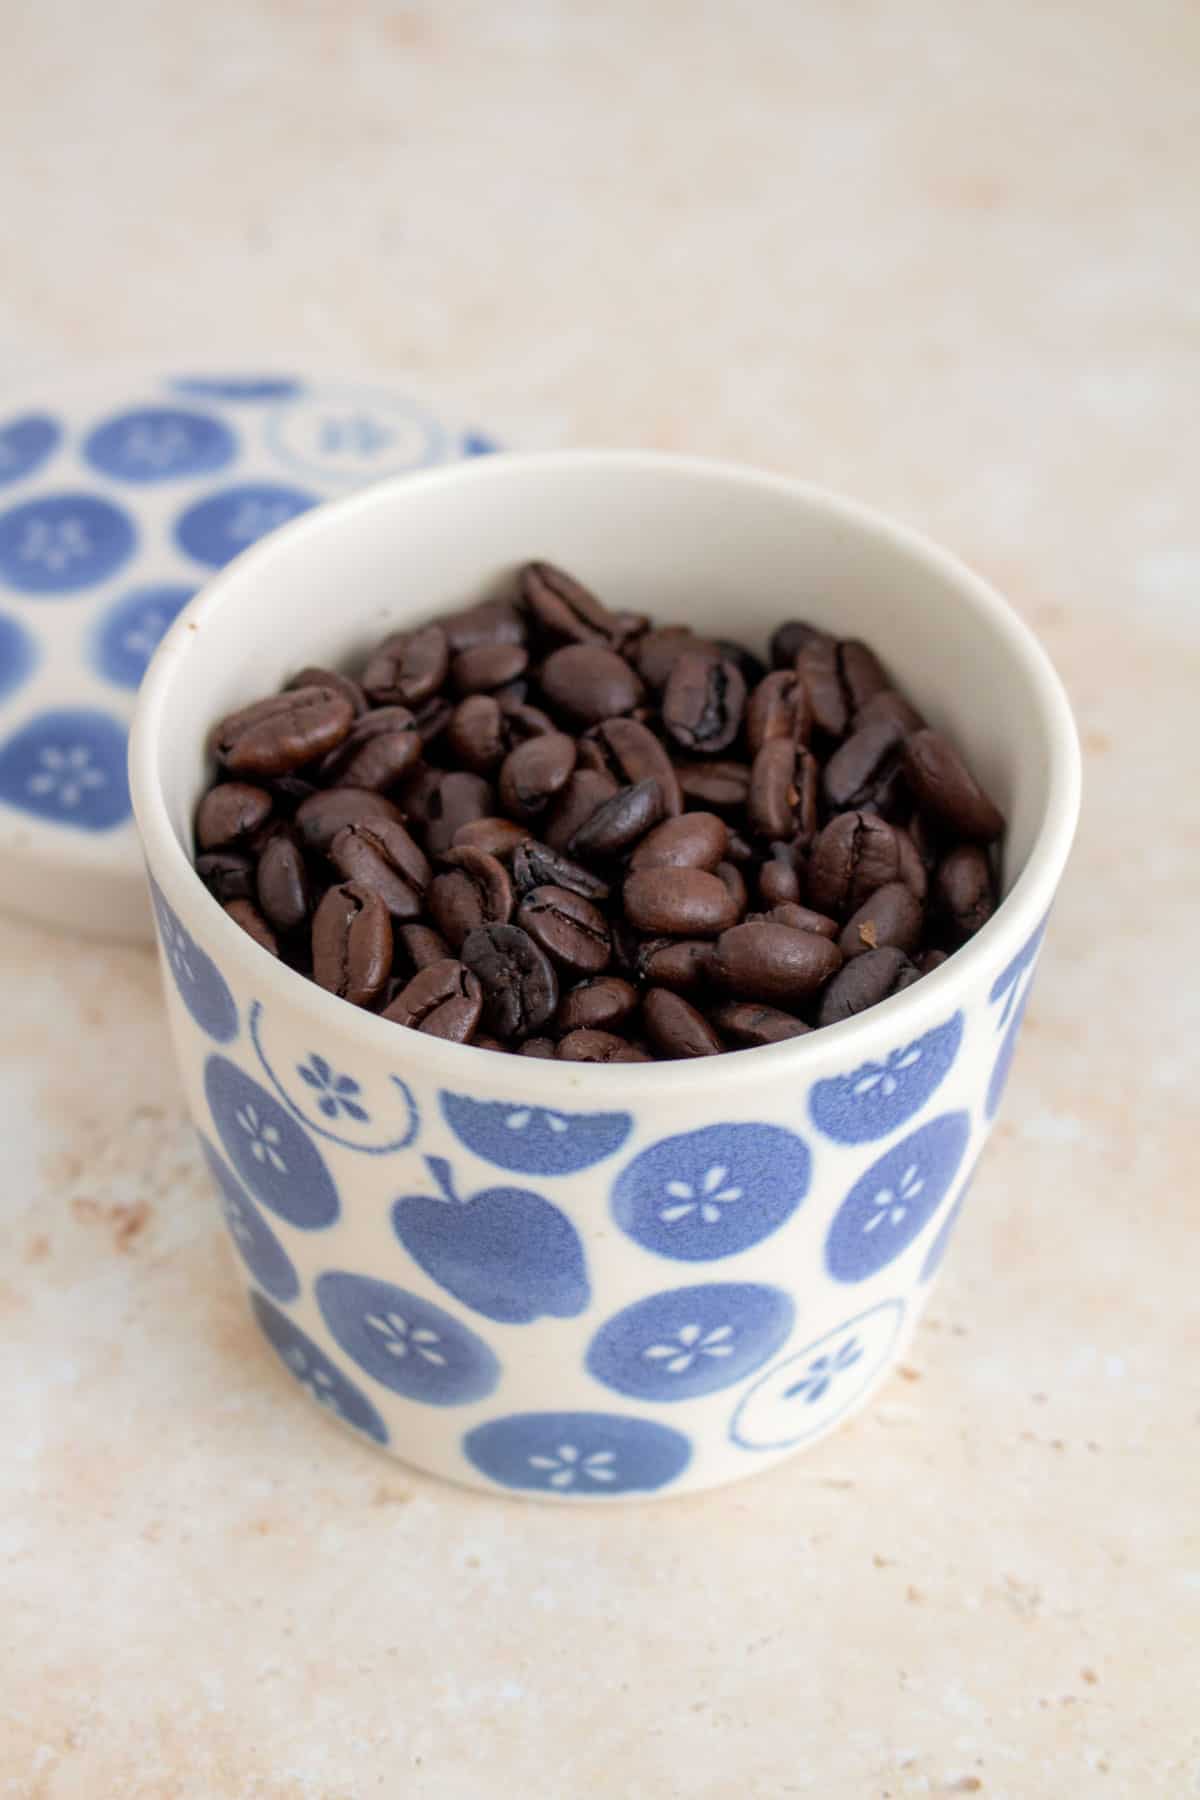 A container of coffee beans.